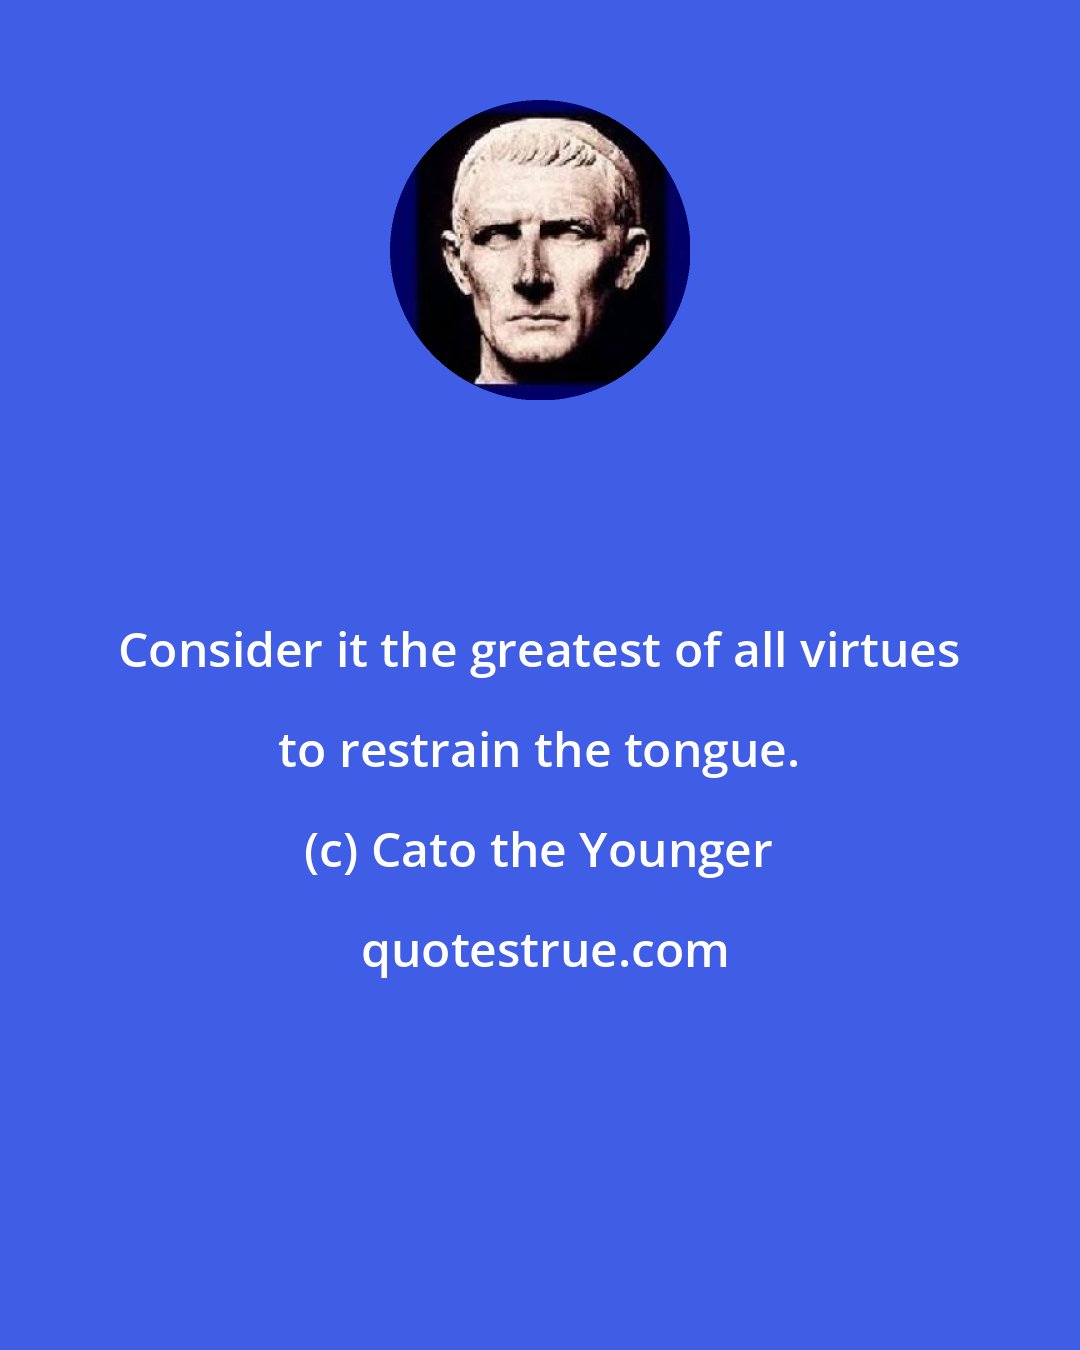 Cato the Younger: Consider it the greatest of all virtues to restrain the tongue.